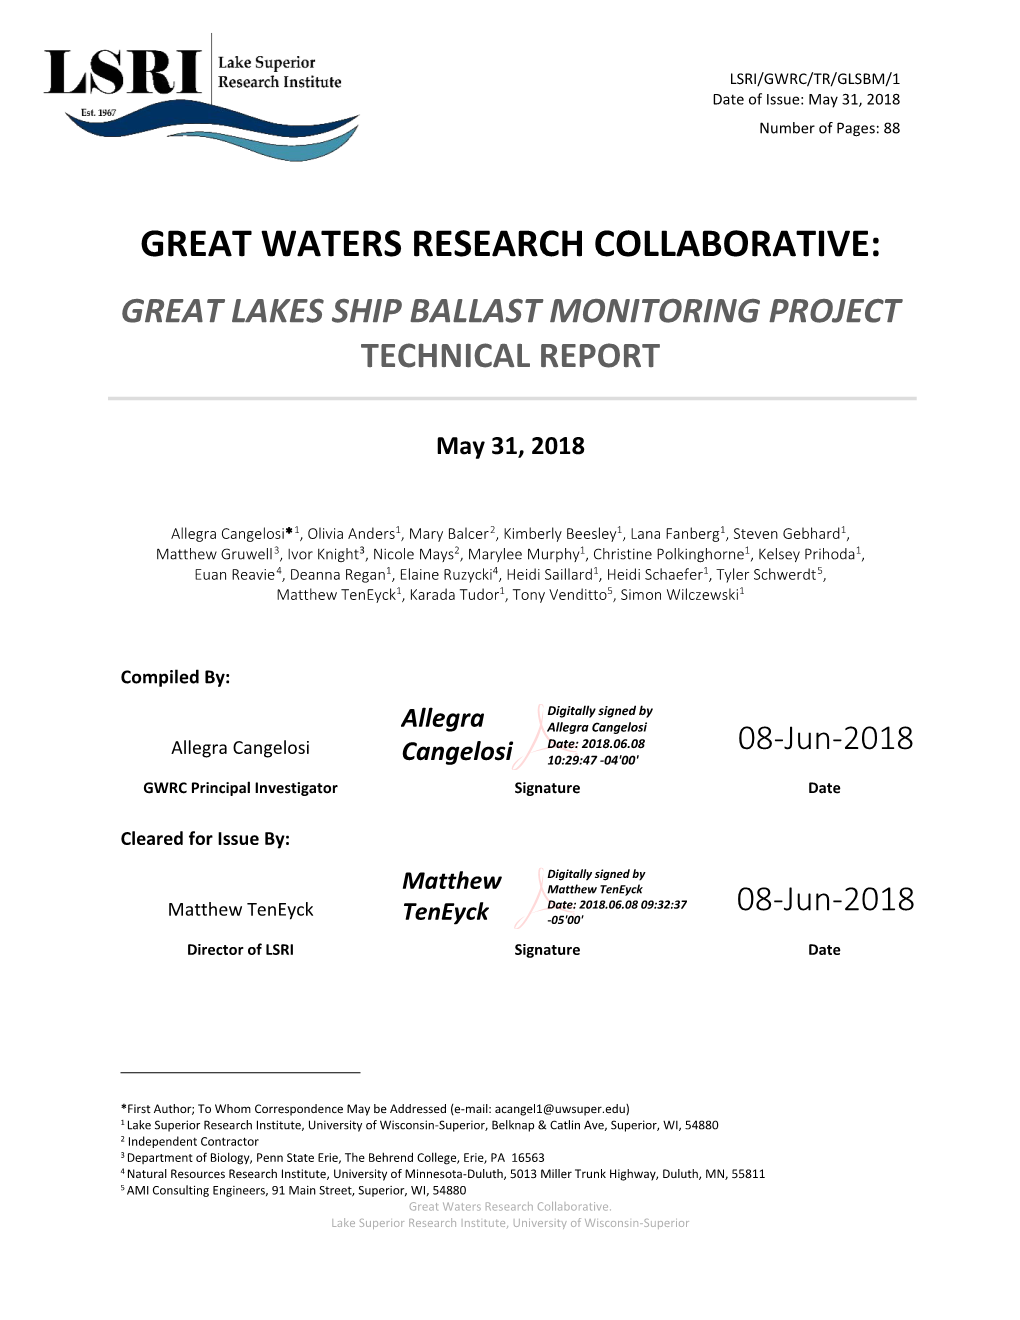 Great Waters Research Collaborative: Great Lakes Ship Ballast Monitoring